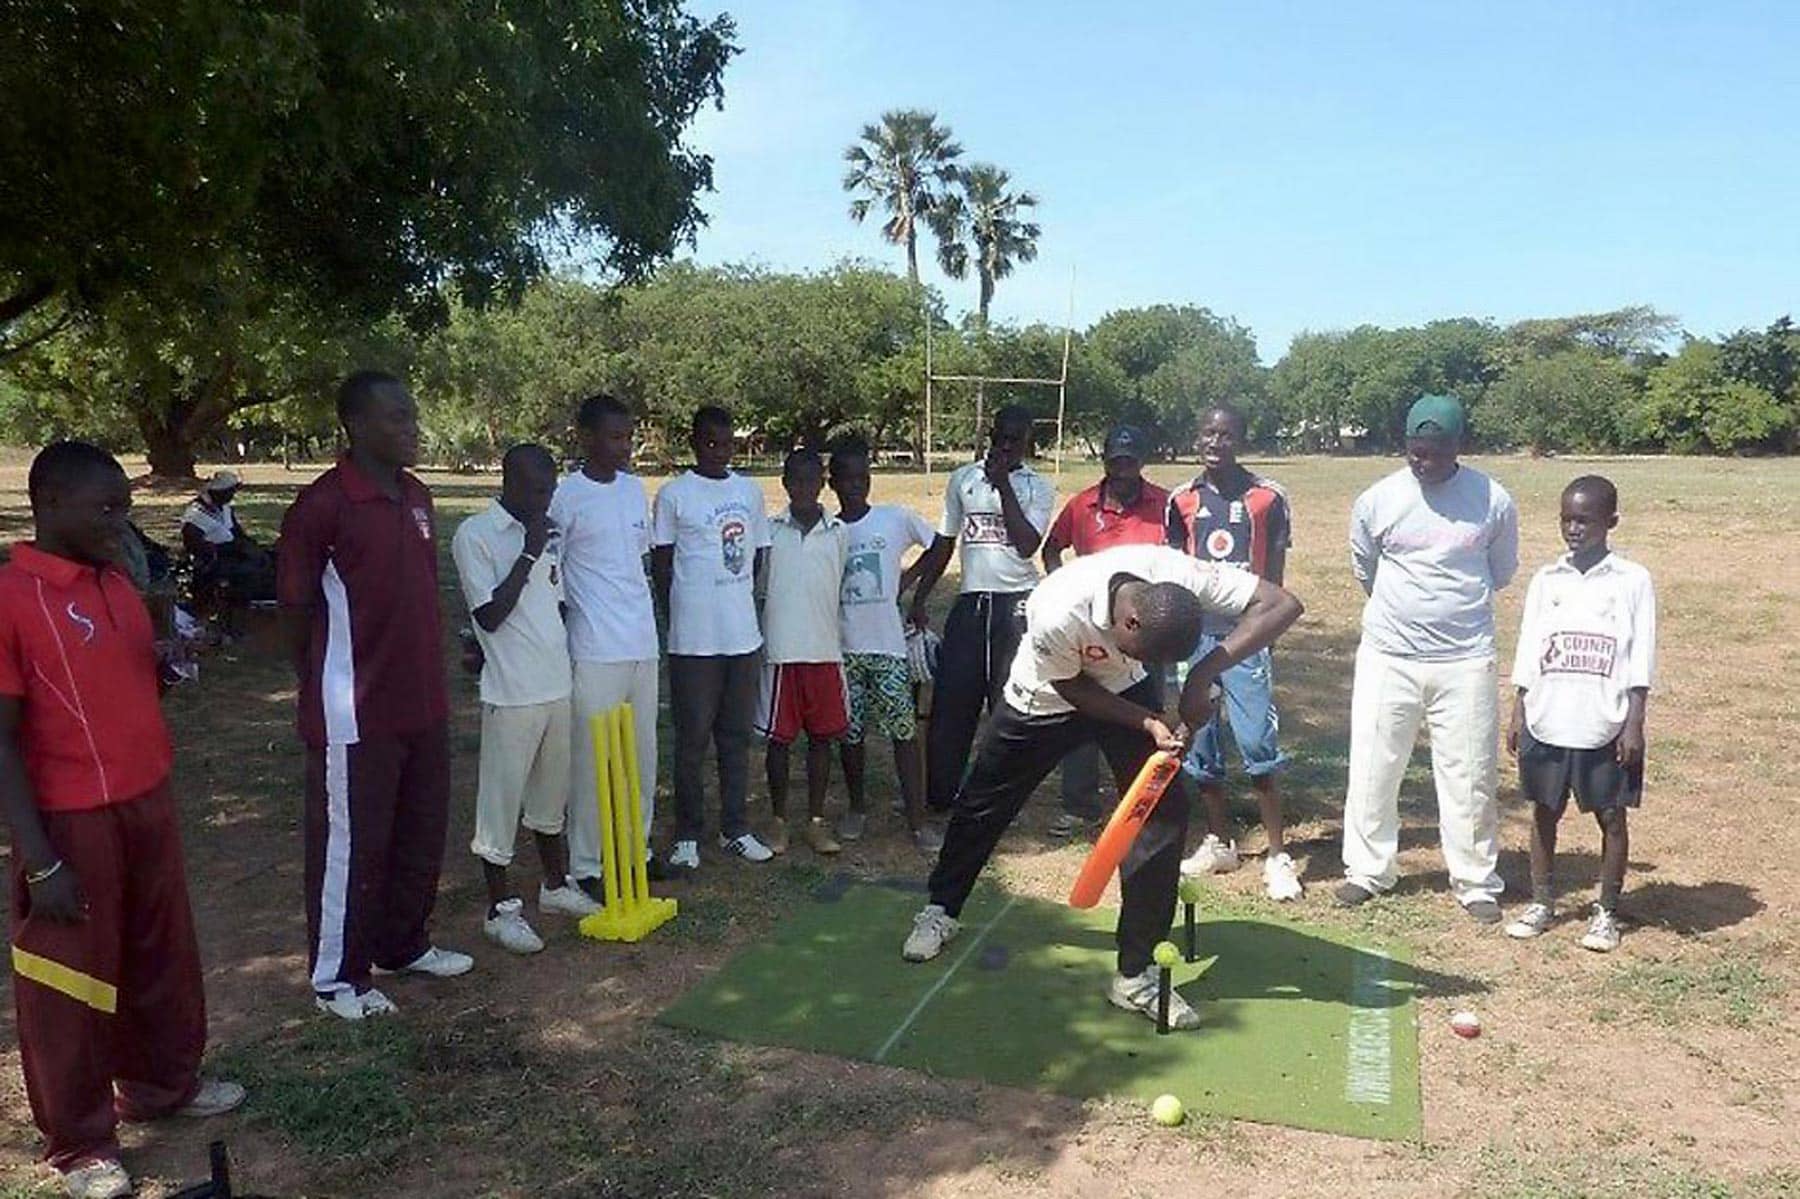 Our Cricket Training Mats go down a storm in The Gambia